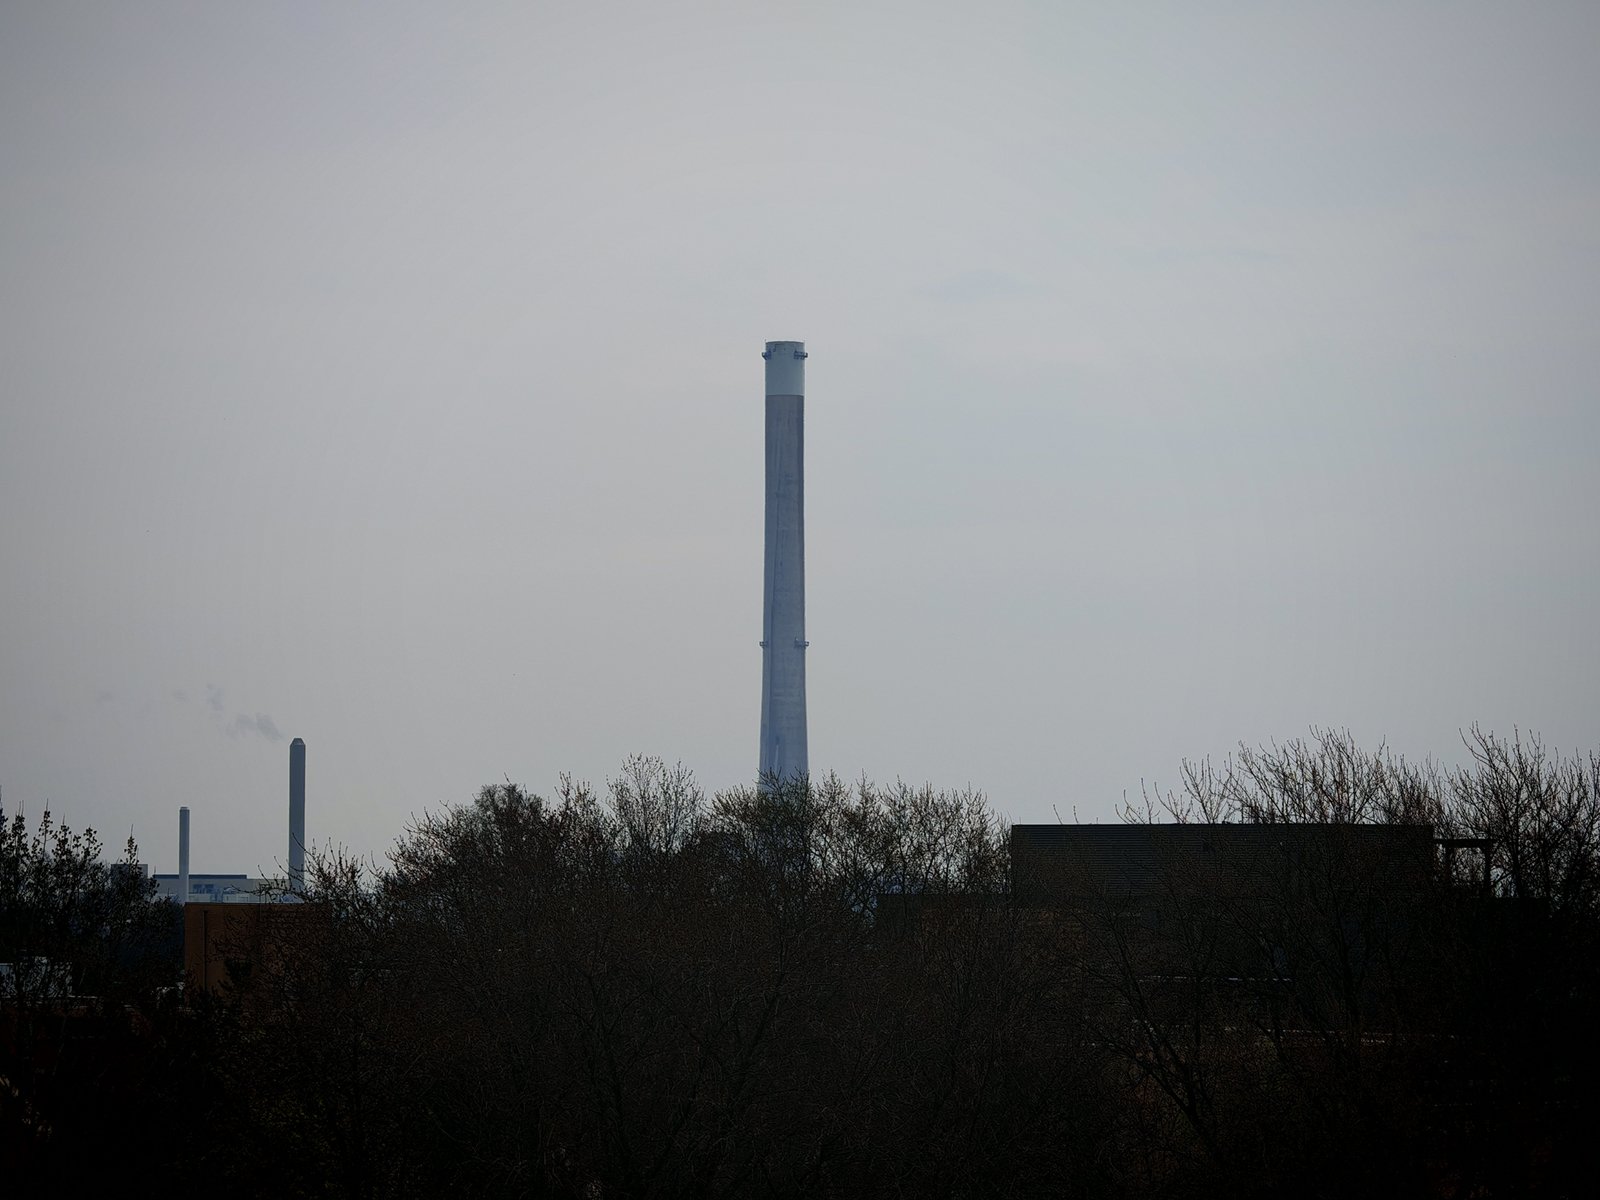 A silhouette of an industrial area with a tall chimney and several smaller structures, against a hazy sky.